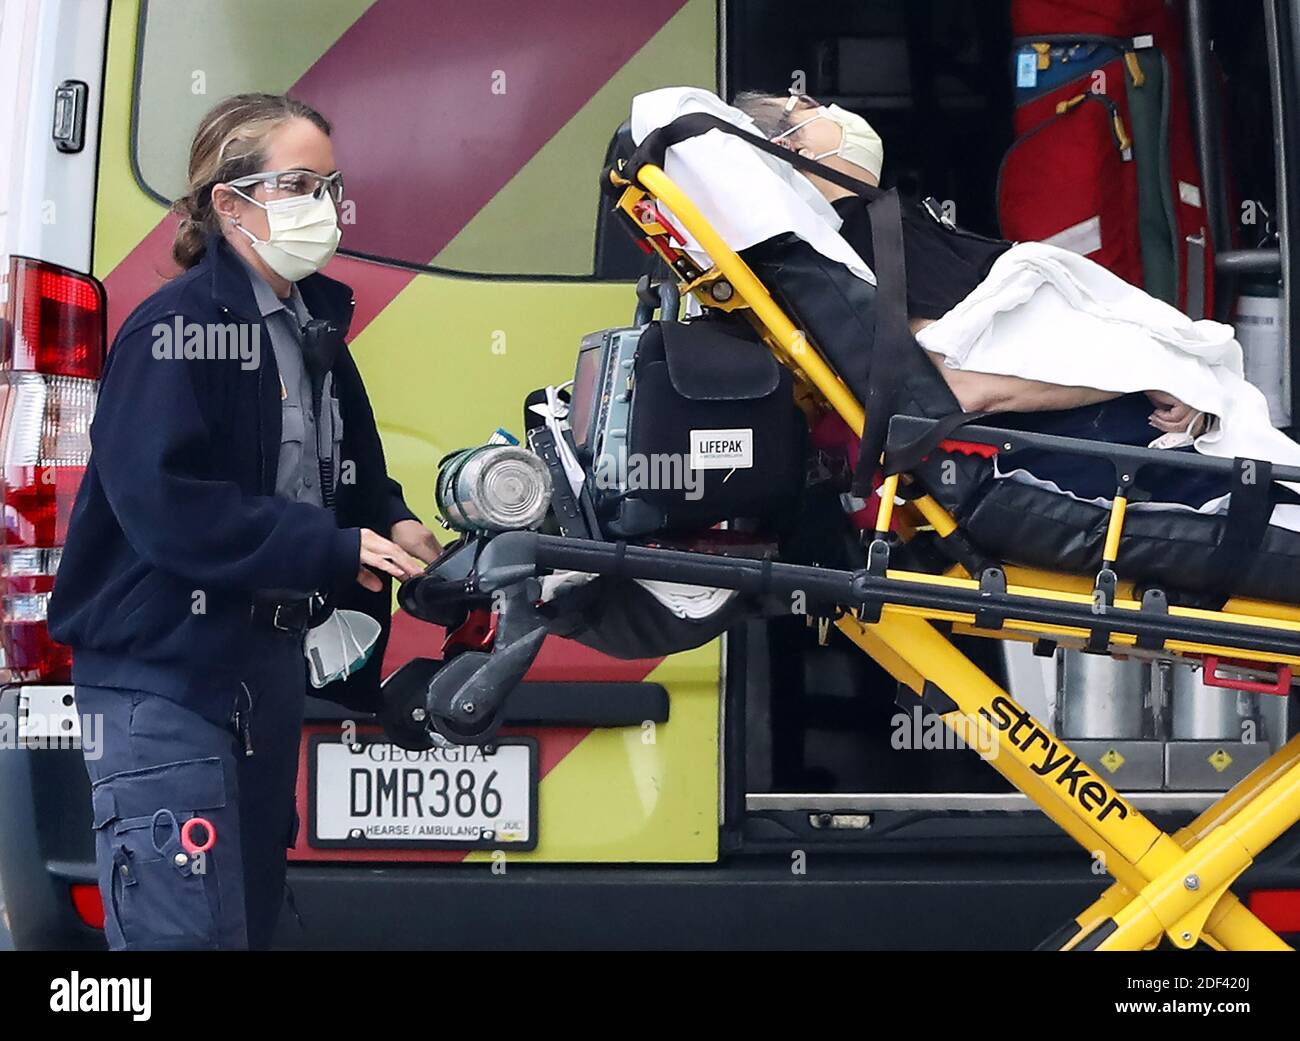 NO FILM, NO VIDEO, NO TV, NO DOCUMENTARY - An ambulance worker and a patient wear masks, indicating possible symptons of the cornavirus, arriving at the emergency entrance at WellStar Kennestone Hospital on Monday, March 16, 2020, in Marietta, Ga. Georgia authorities confirmed the stat's first coronavirus-related death at WellStar Kennestone Hospital last Thursday, saying the victim, who tested positive for the COVID-19 illness on March 7 also had 'underlying medical conditions.' Photo by Curtis Compton/Atlanta Journal-Constitution/TNS/ABACAPRESS.COM Stock Photo